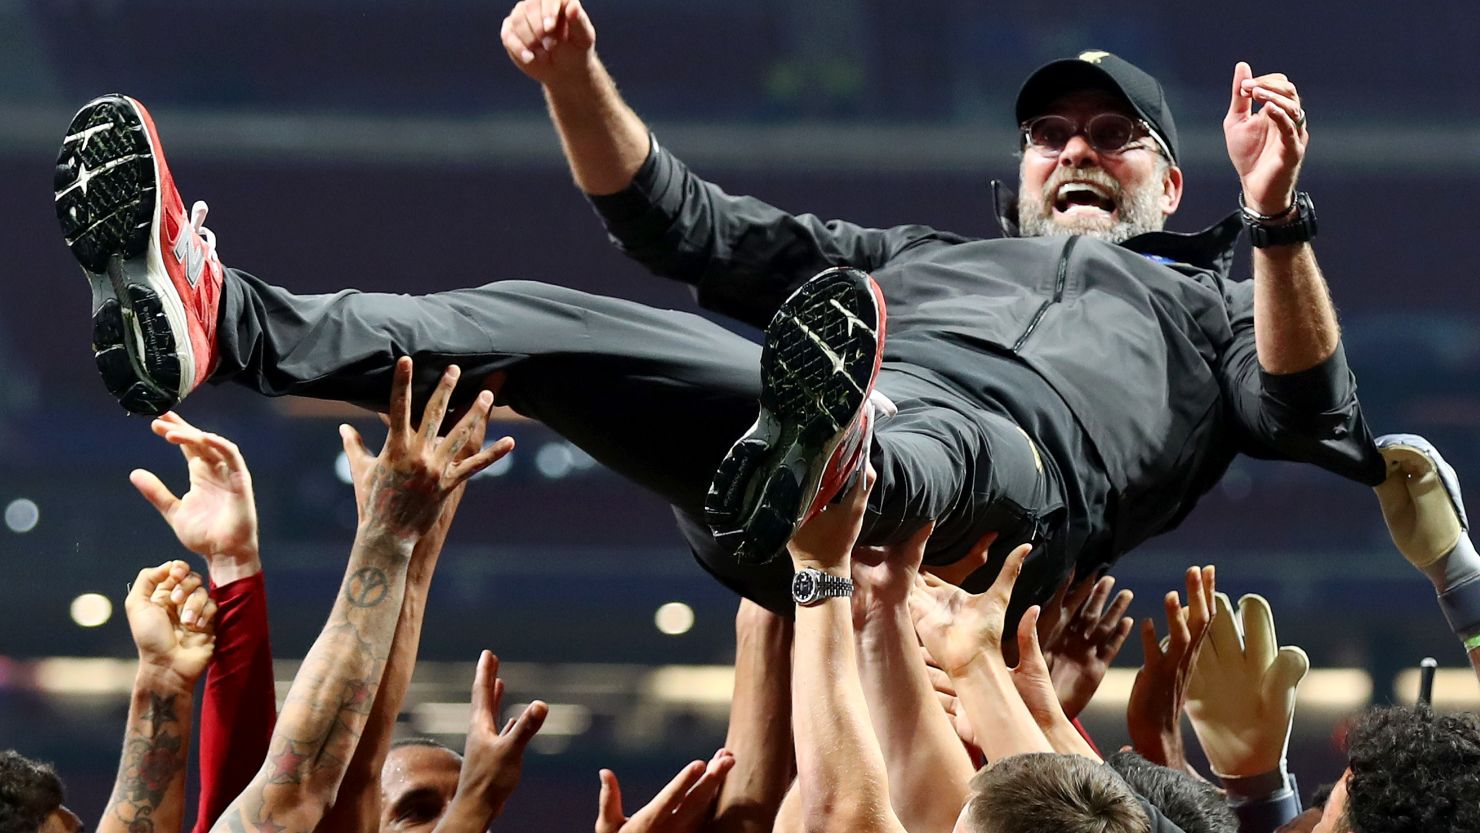 Liverpool manager Jurgen Klopp is thrown in the air as he celebrates with his players and staff after winning the Champions League final against Tottenham Hotspur in Madrid on Saturday. 